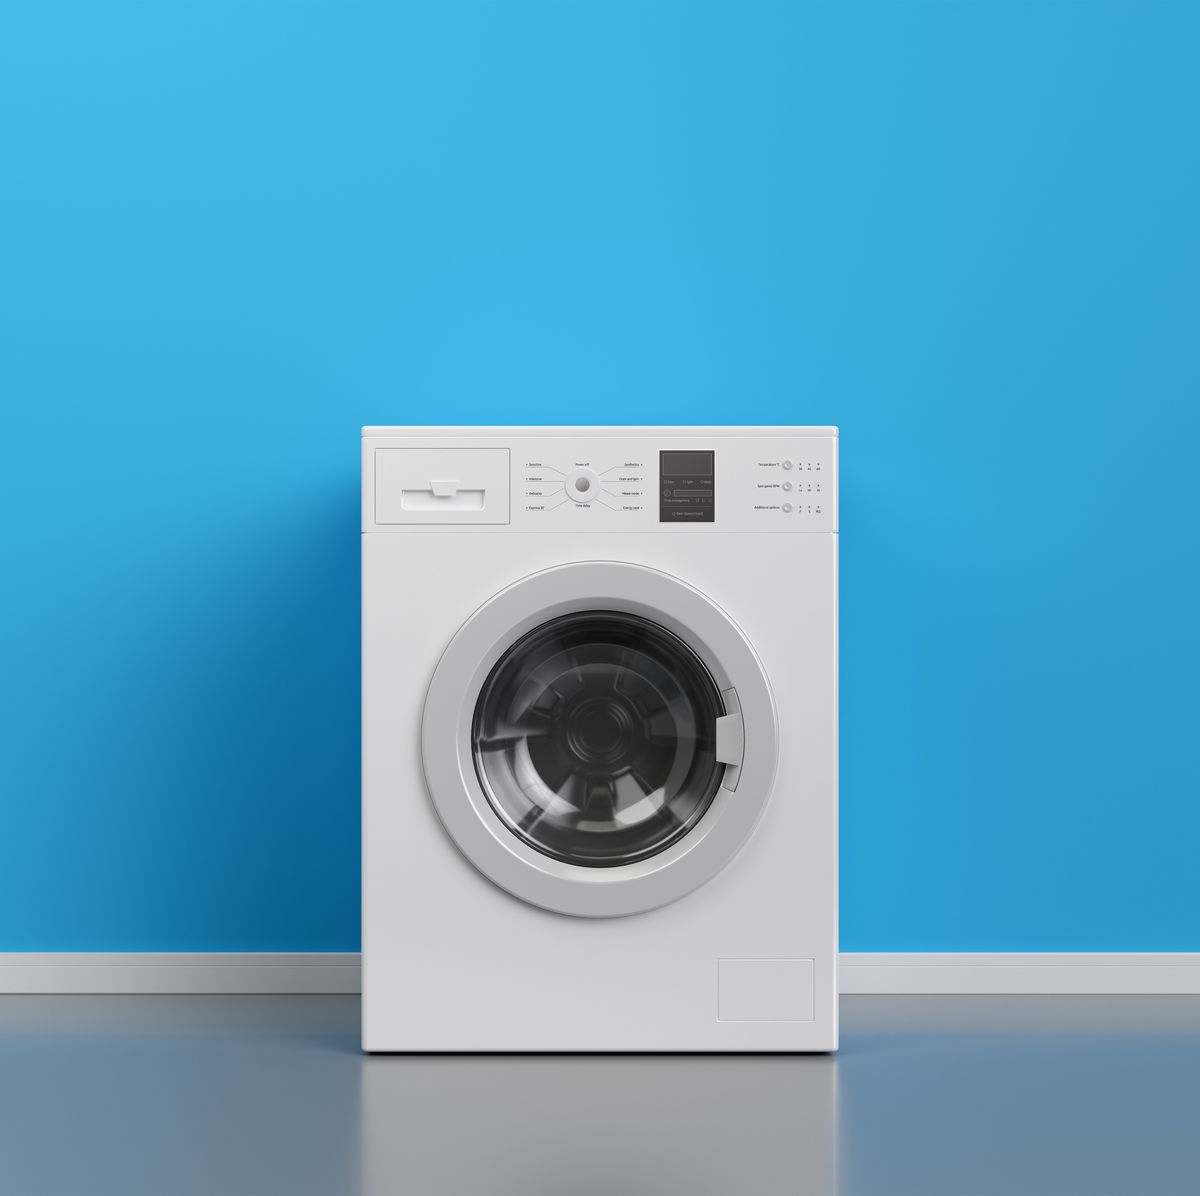 How to Clean the Washing Machine